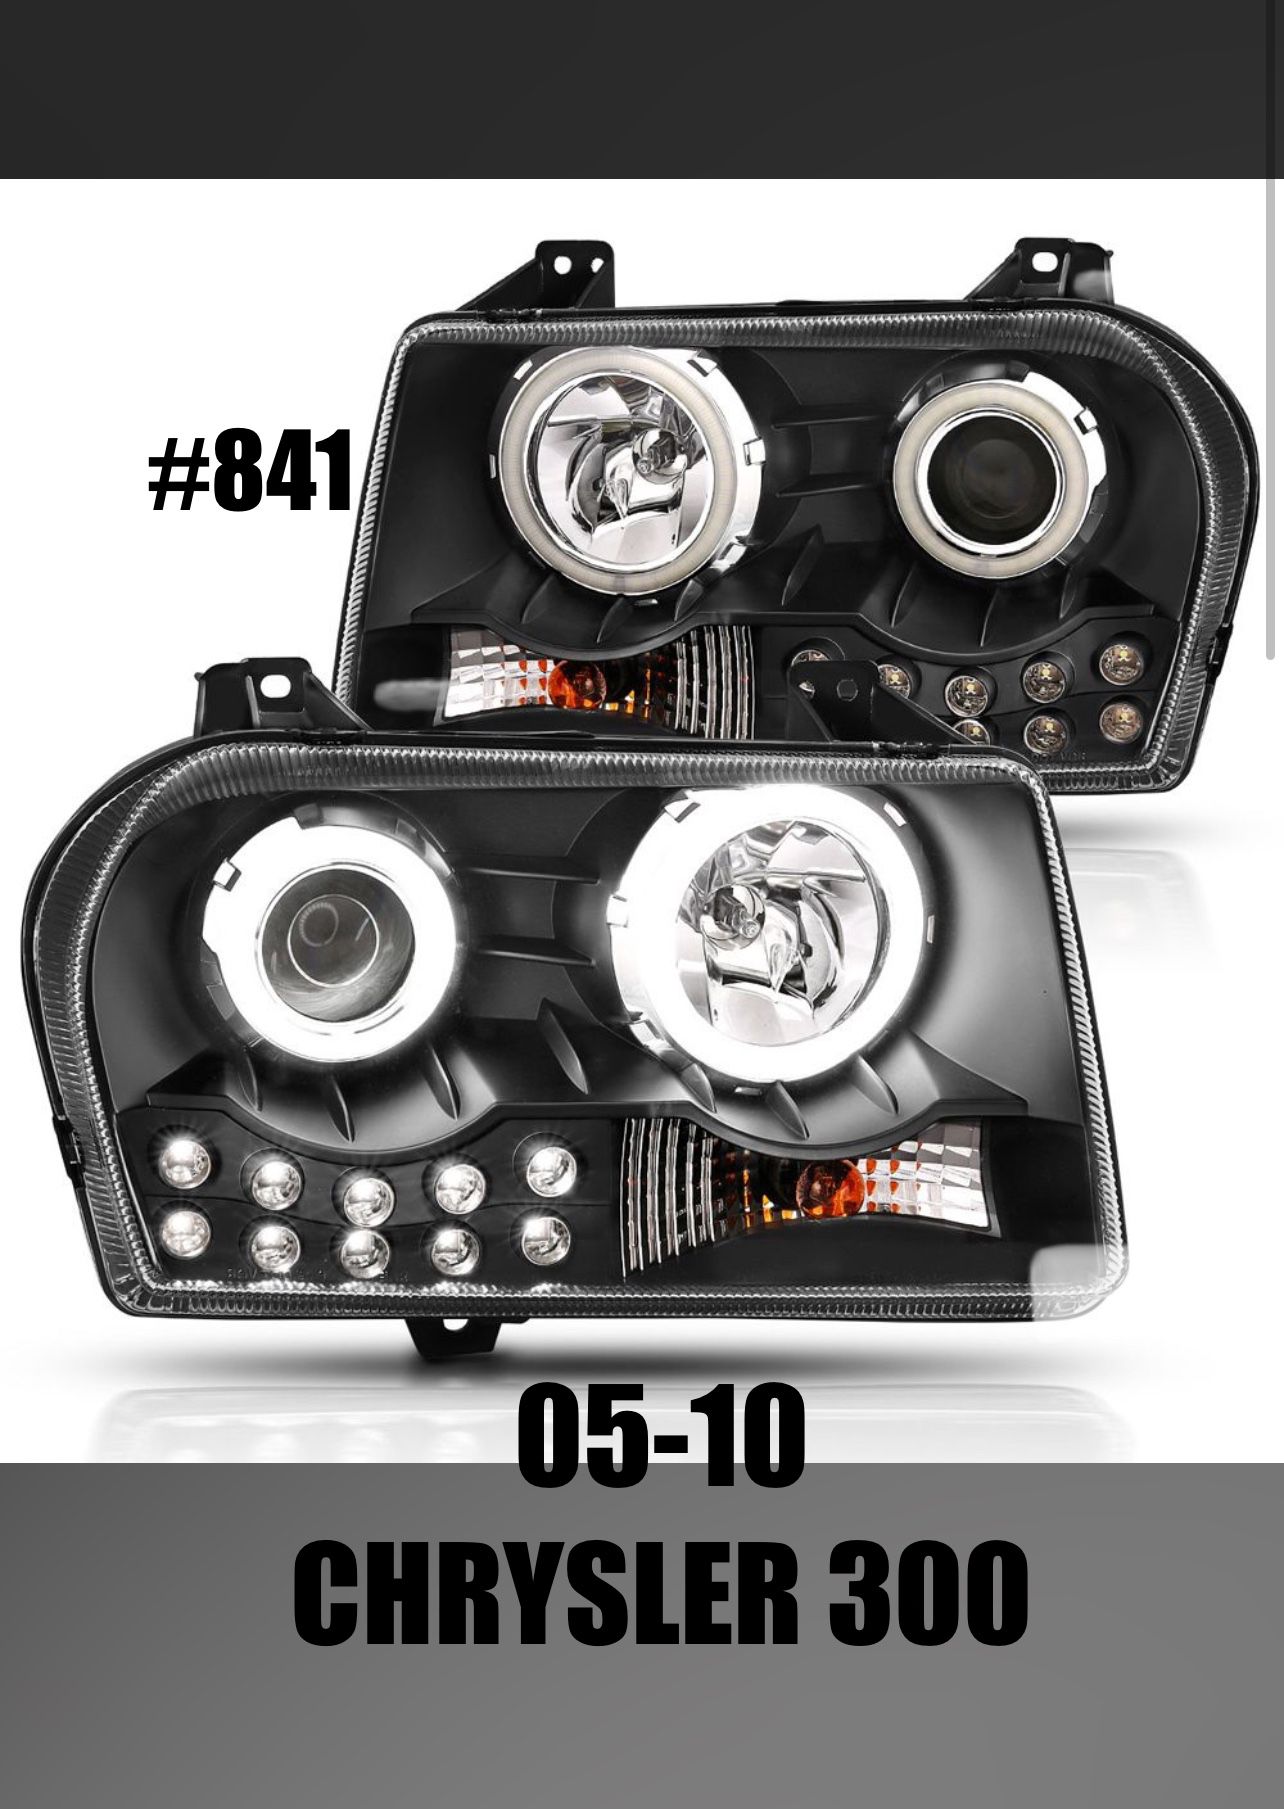 2005 To 2010 Chrysler 300 Headlights (FOR THE PAIR)